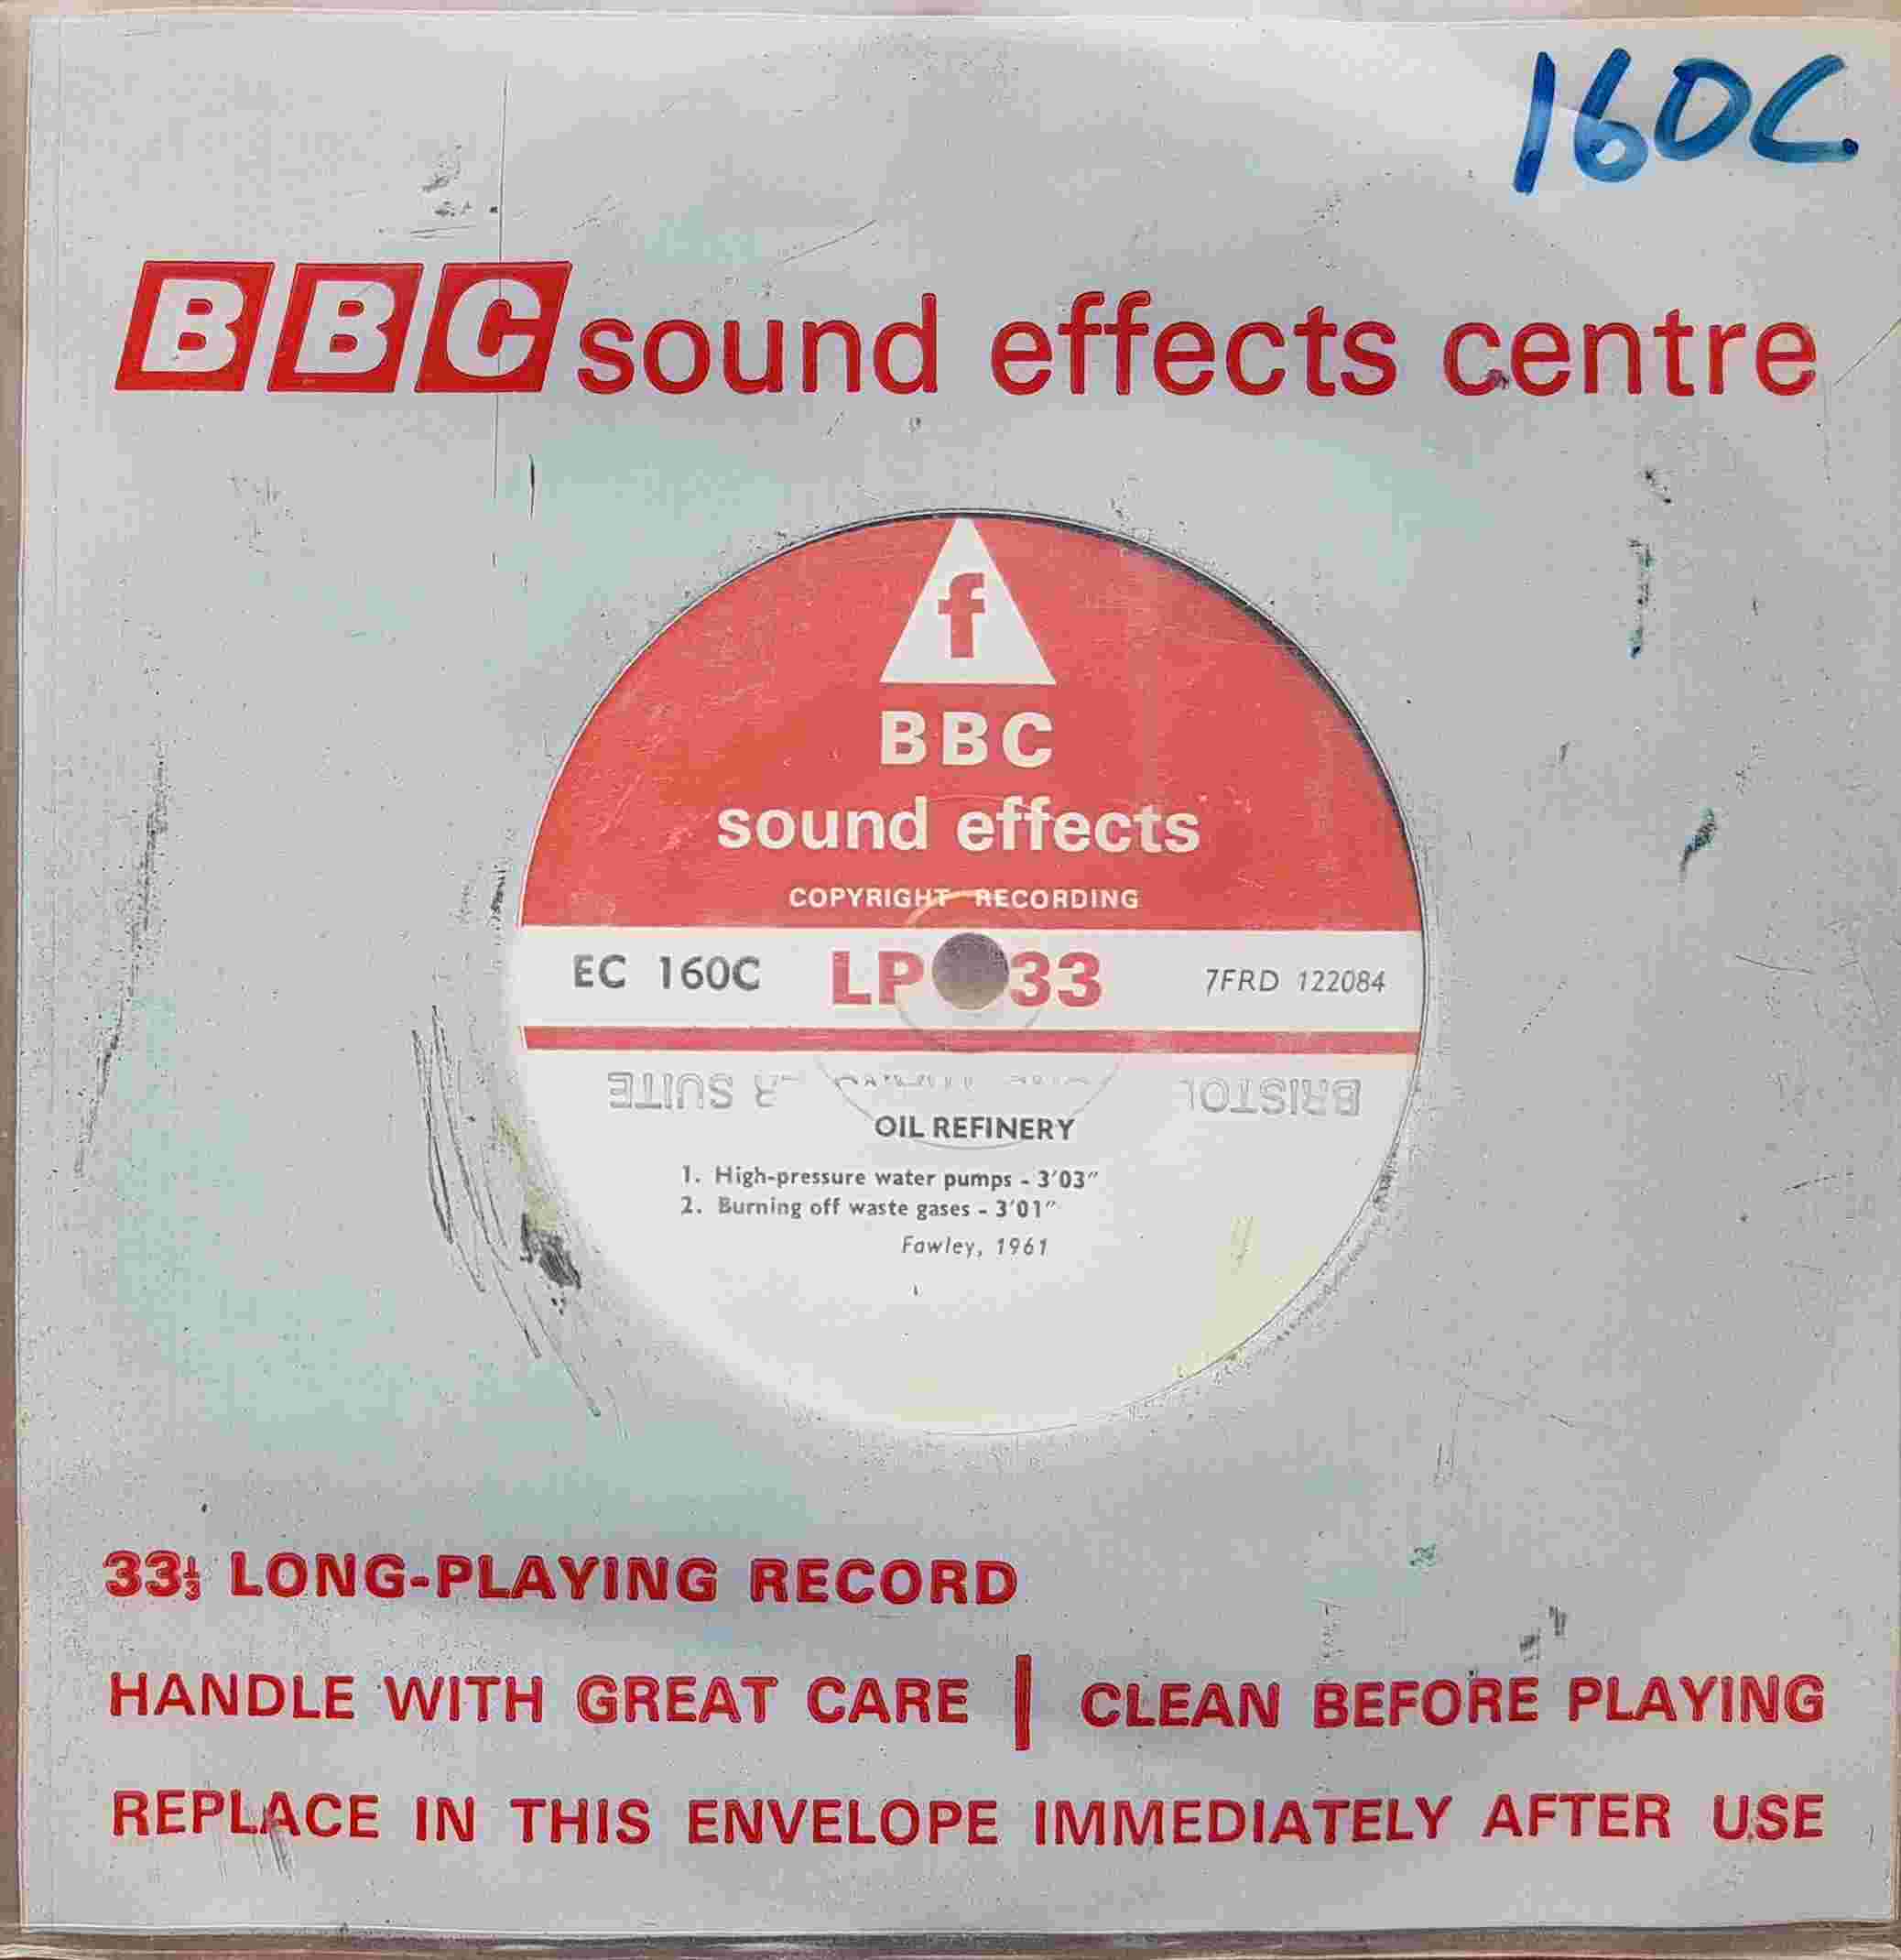 Picture of EC 160C Oil refinery by artist Not registered from the BBC singles - Records and Tapes library